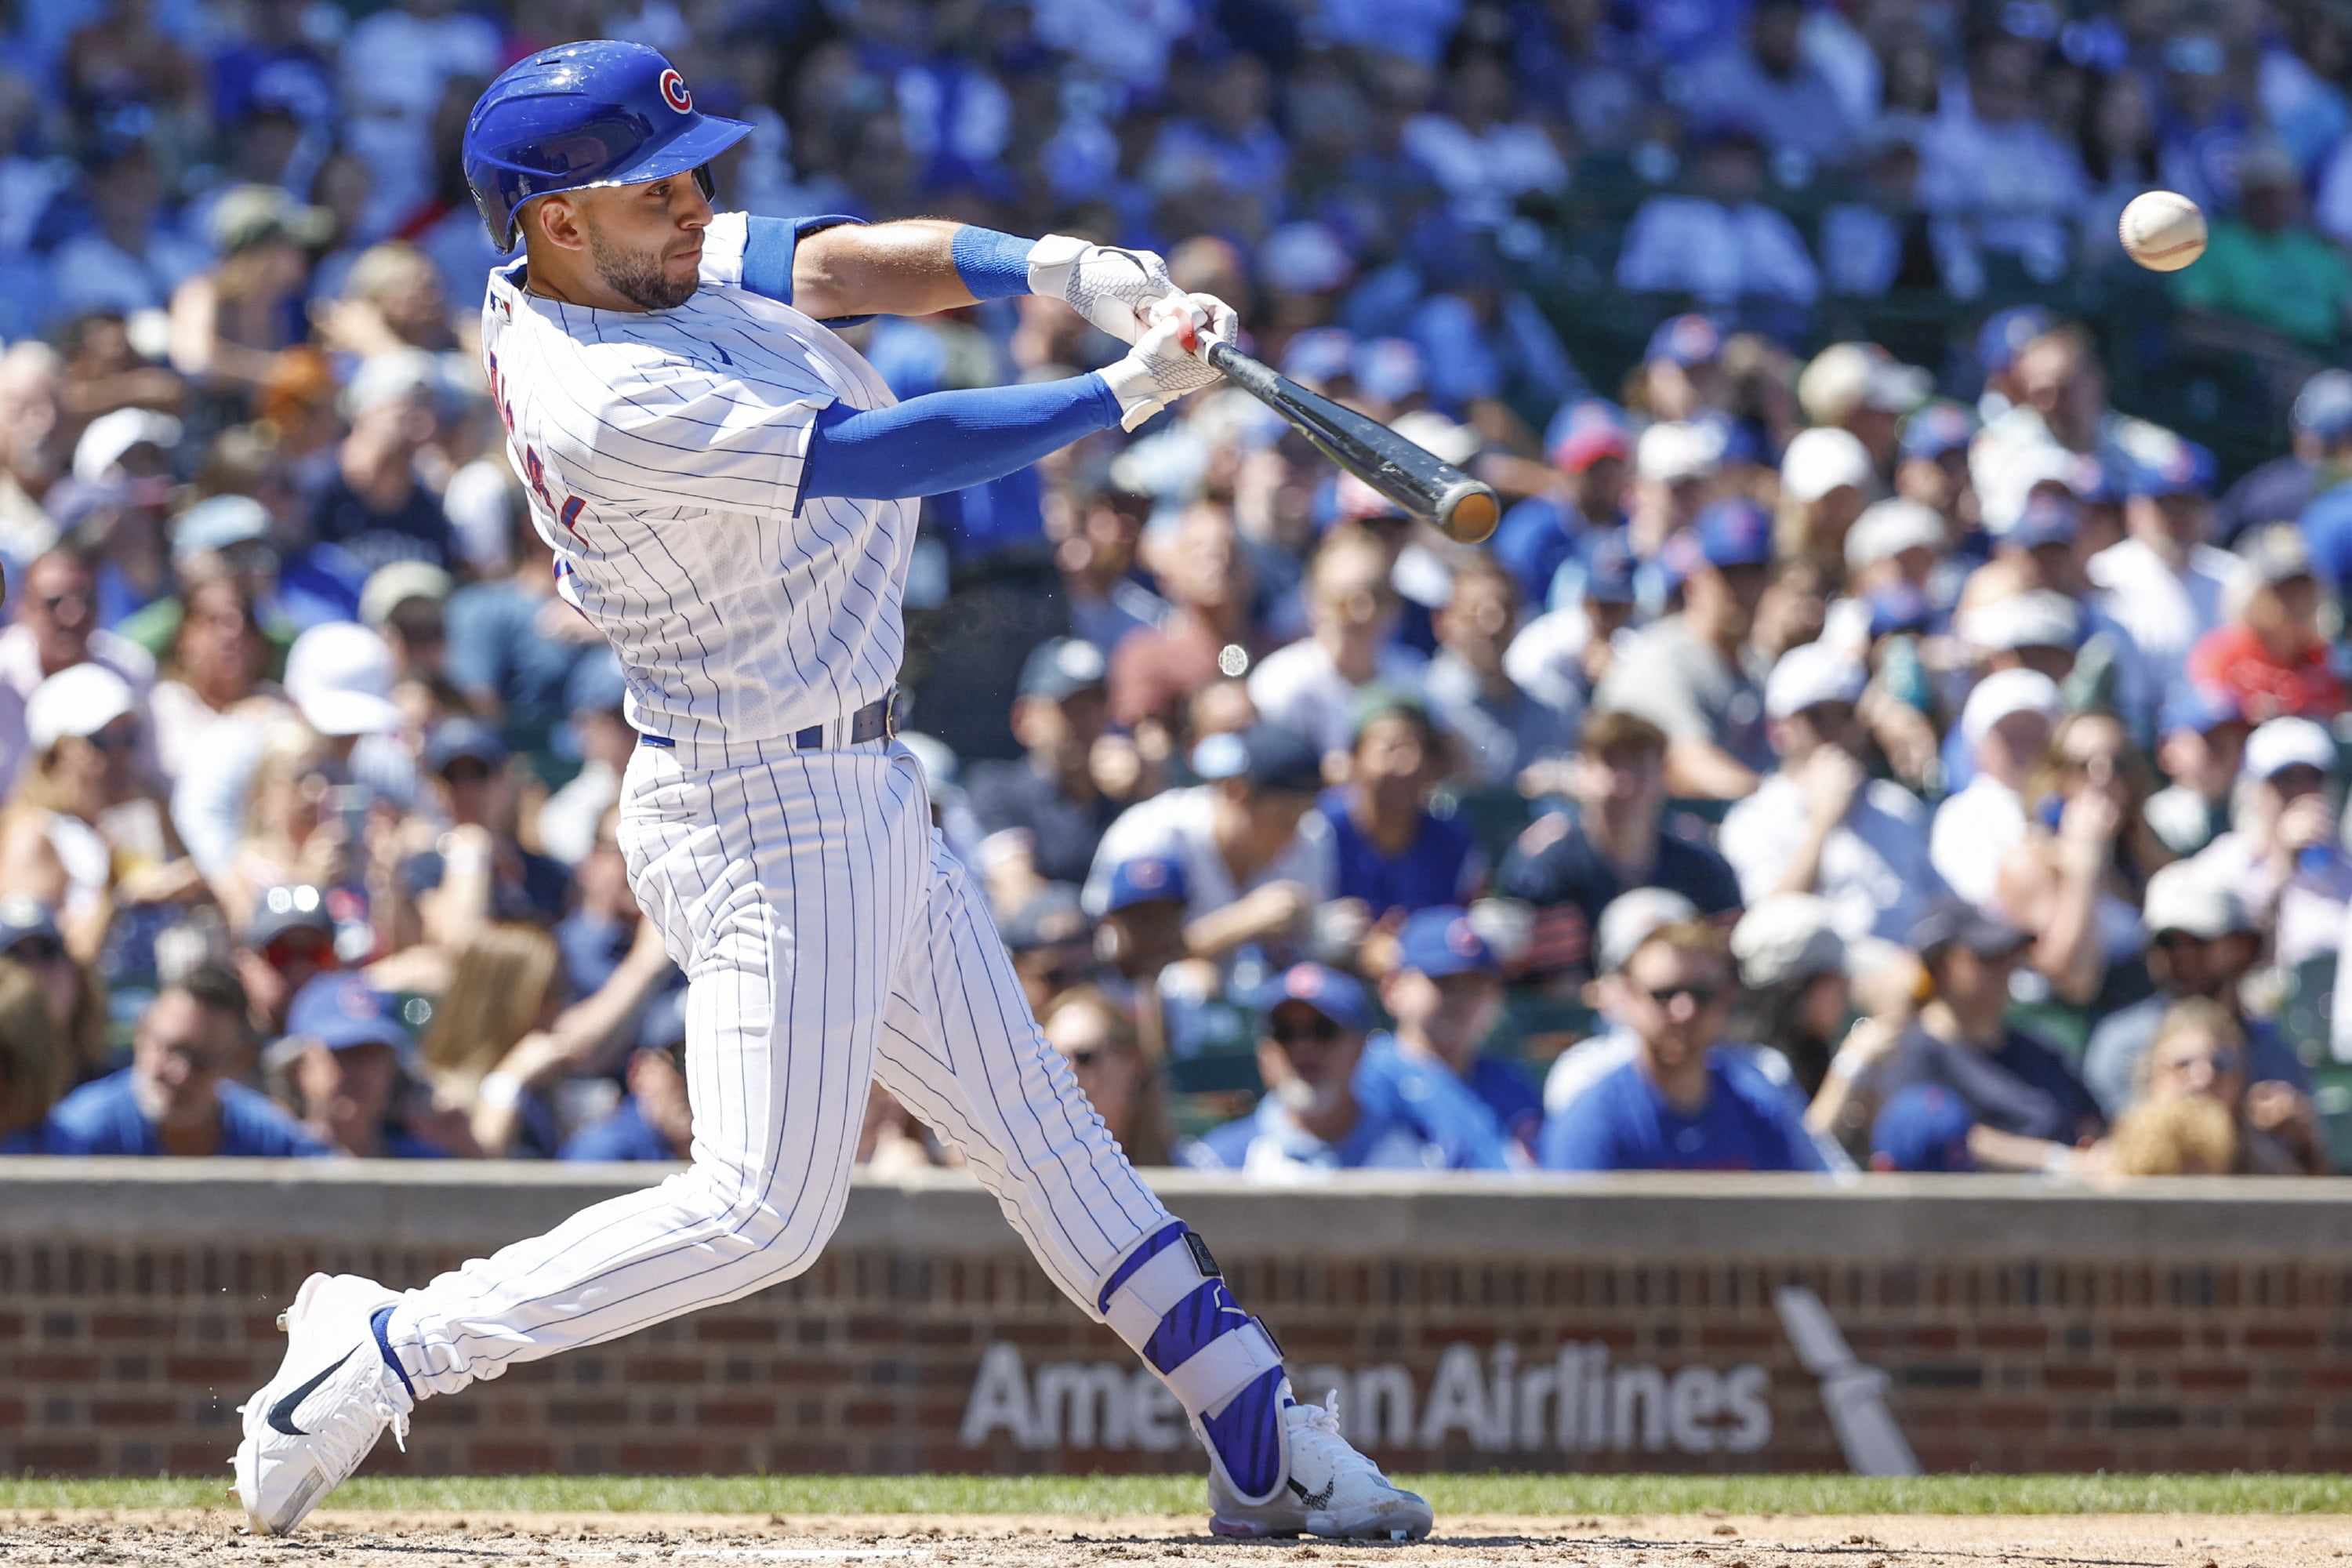 Smyly stars as Cubs beat Reds in 2nd 'Field of Dreams' game